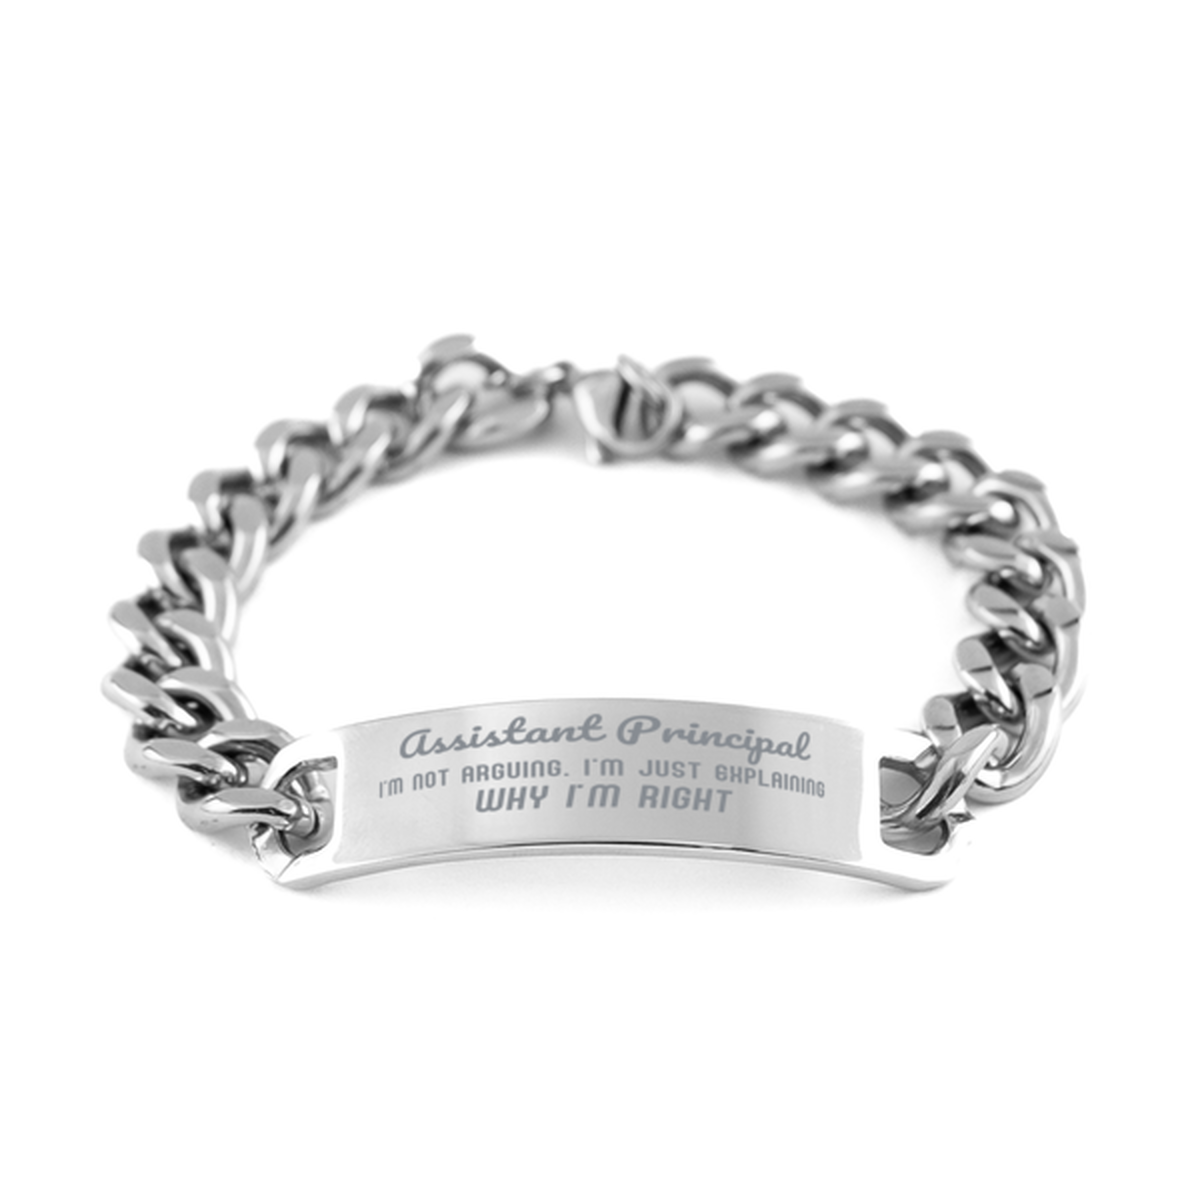 Assistant Principal I'm not Arguing. I'm Just Explaining Why I'm RIGHT Cuban Chain Stainless Steel Bracelet, Graduation Birthday Christmas Assistant Principal Gifts For Assistant Principal Funny Saying Quote Present for Men Women Coworker